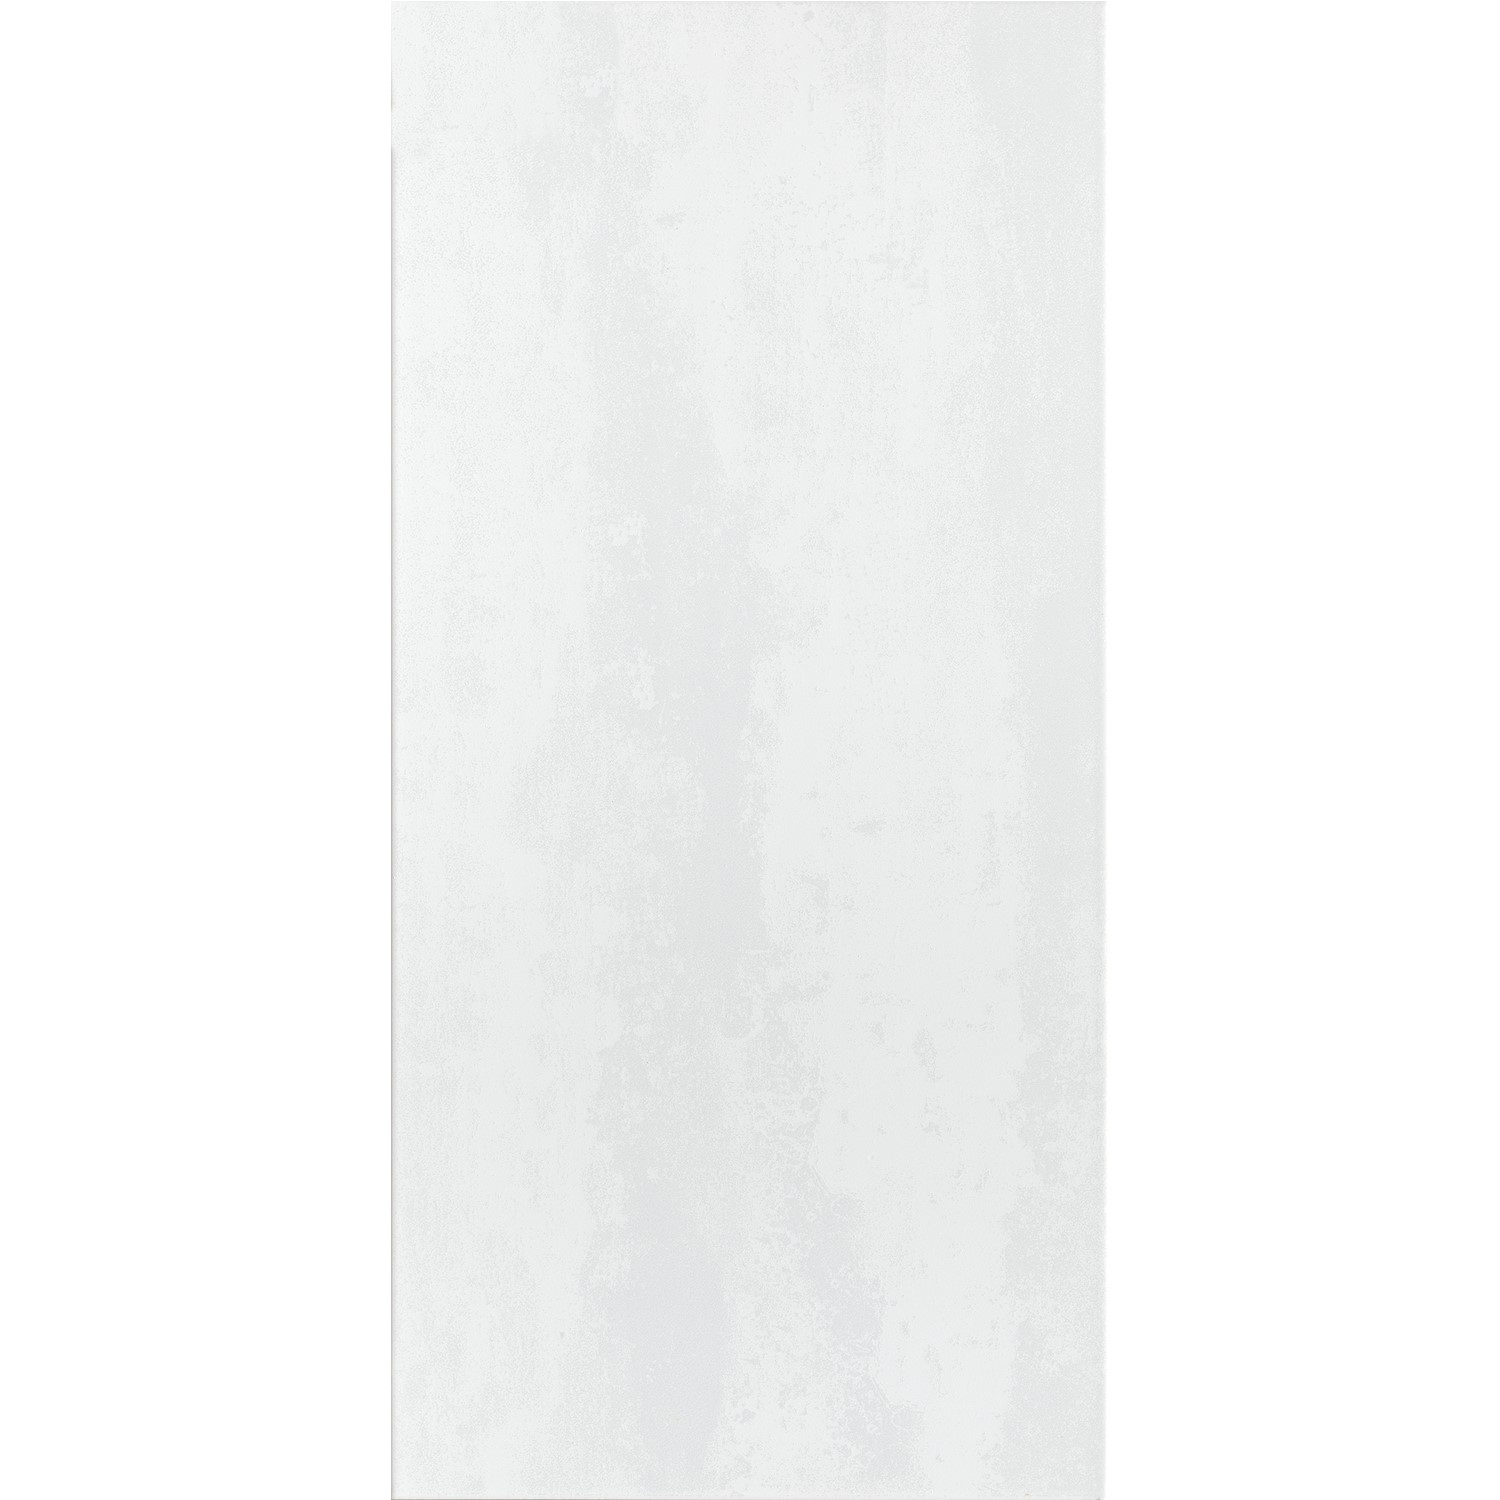 White Shaded Effect Wall Tile 30 x 60cm - Luan